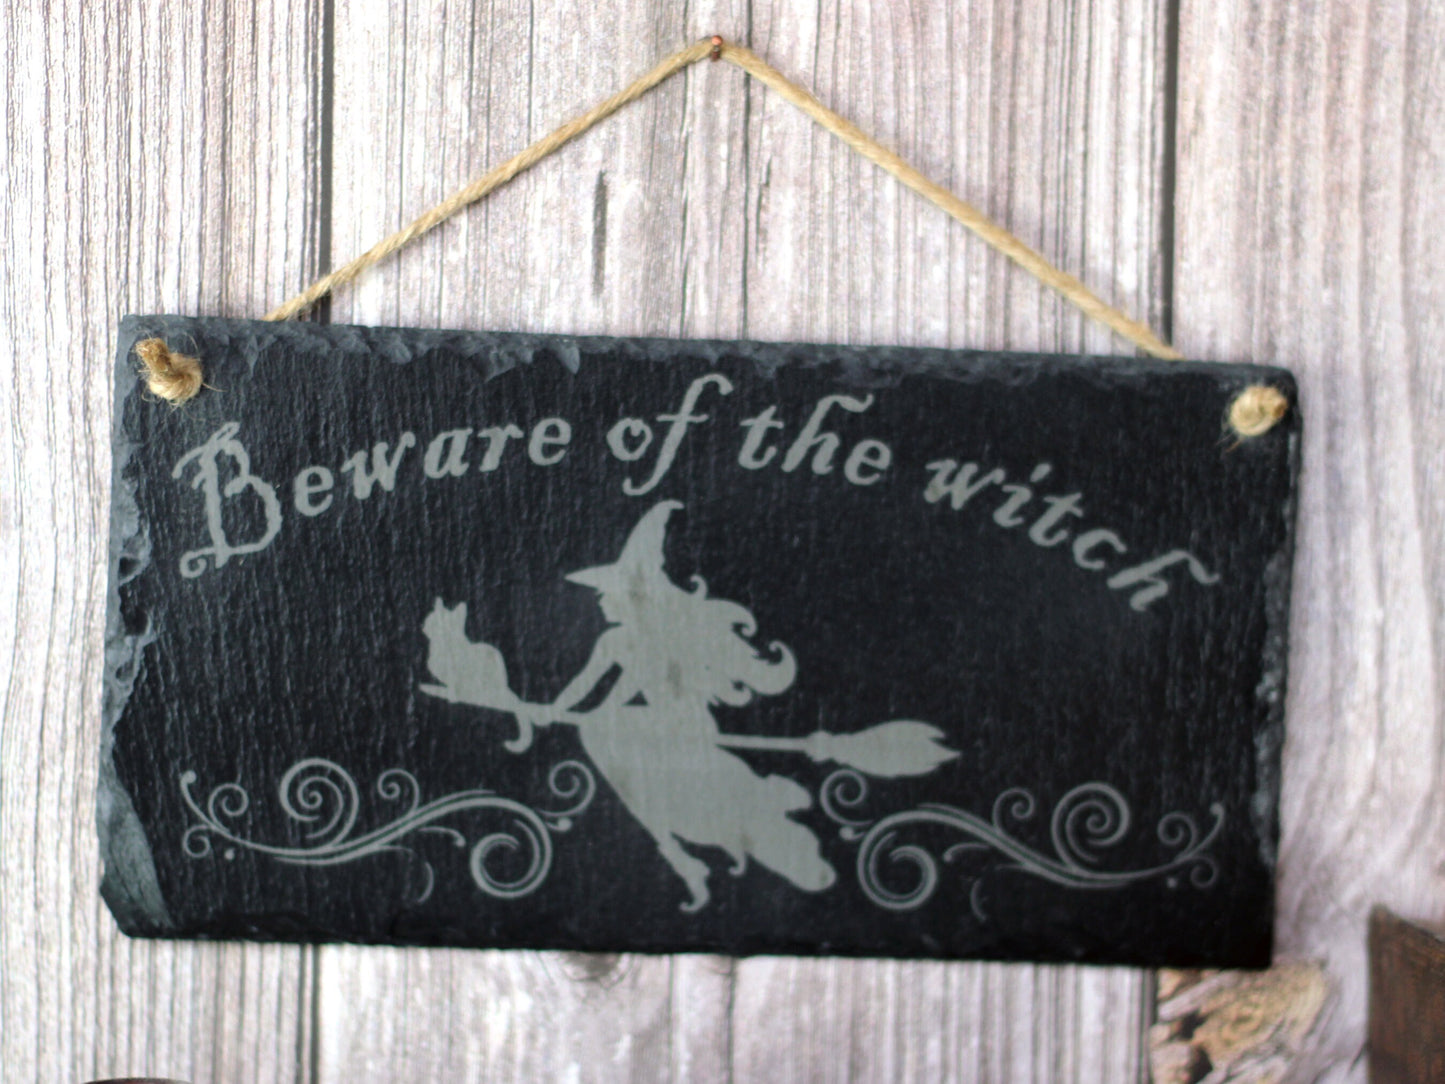 Slate beware of the witch sign with cat, raven or hat design, witchcraft or Wicca gift